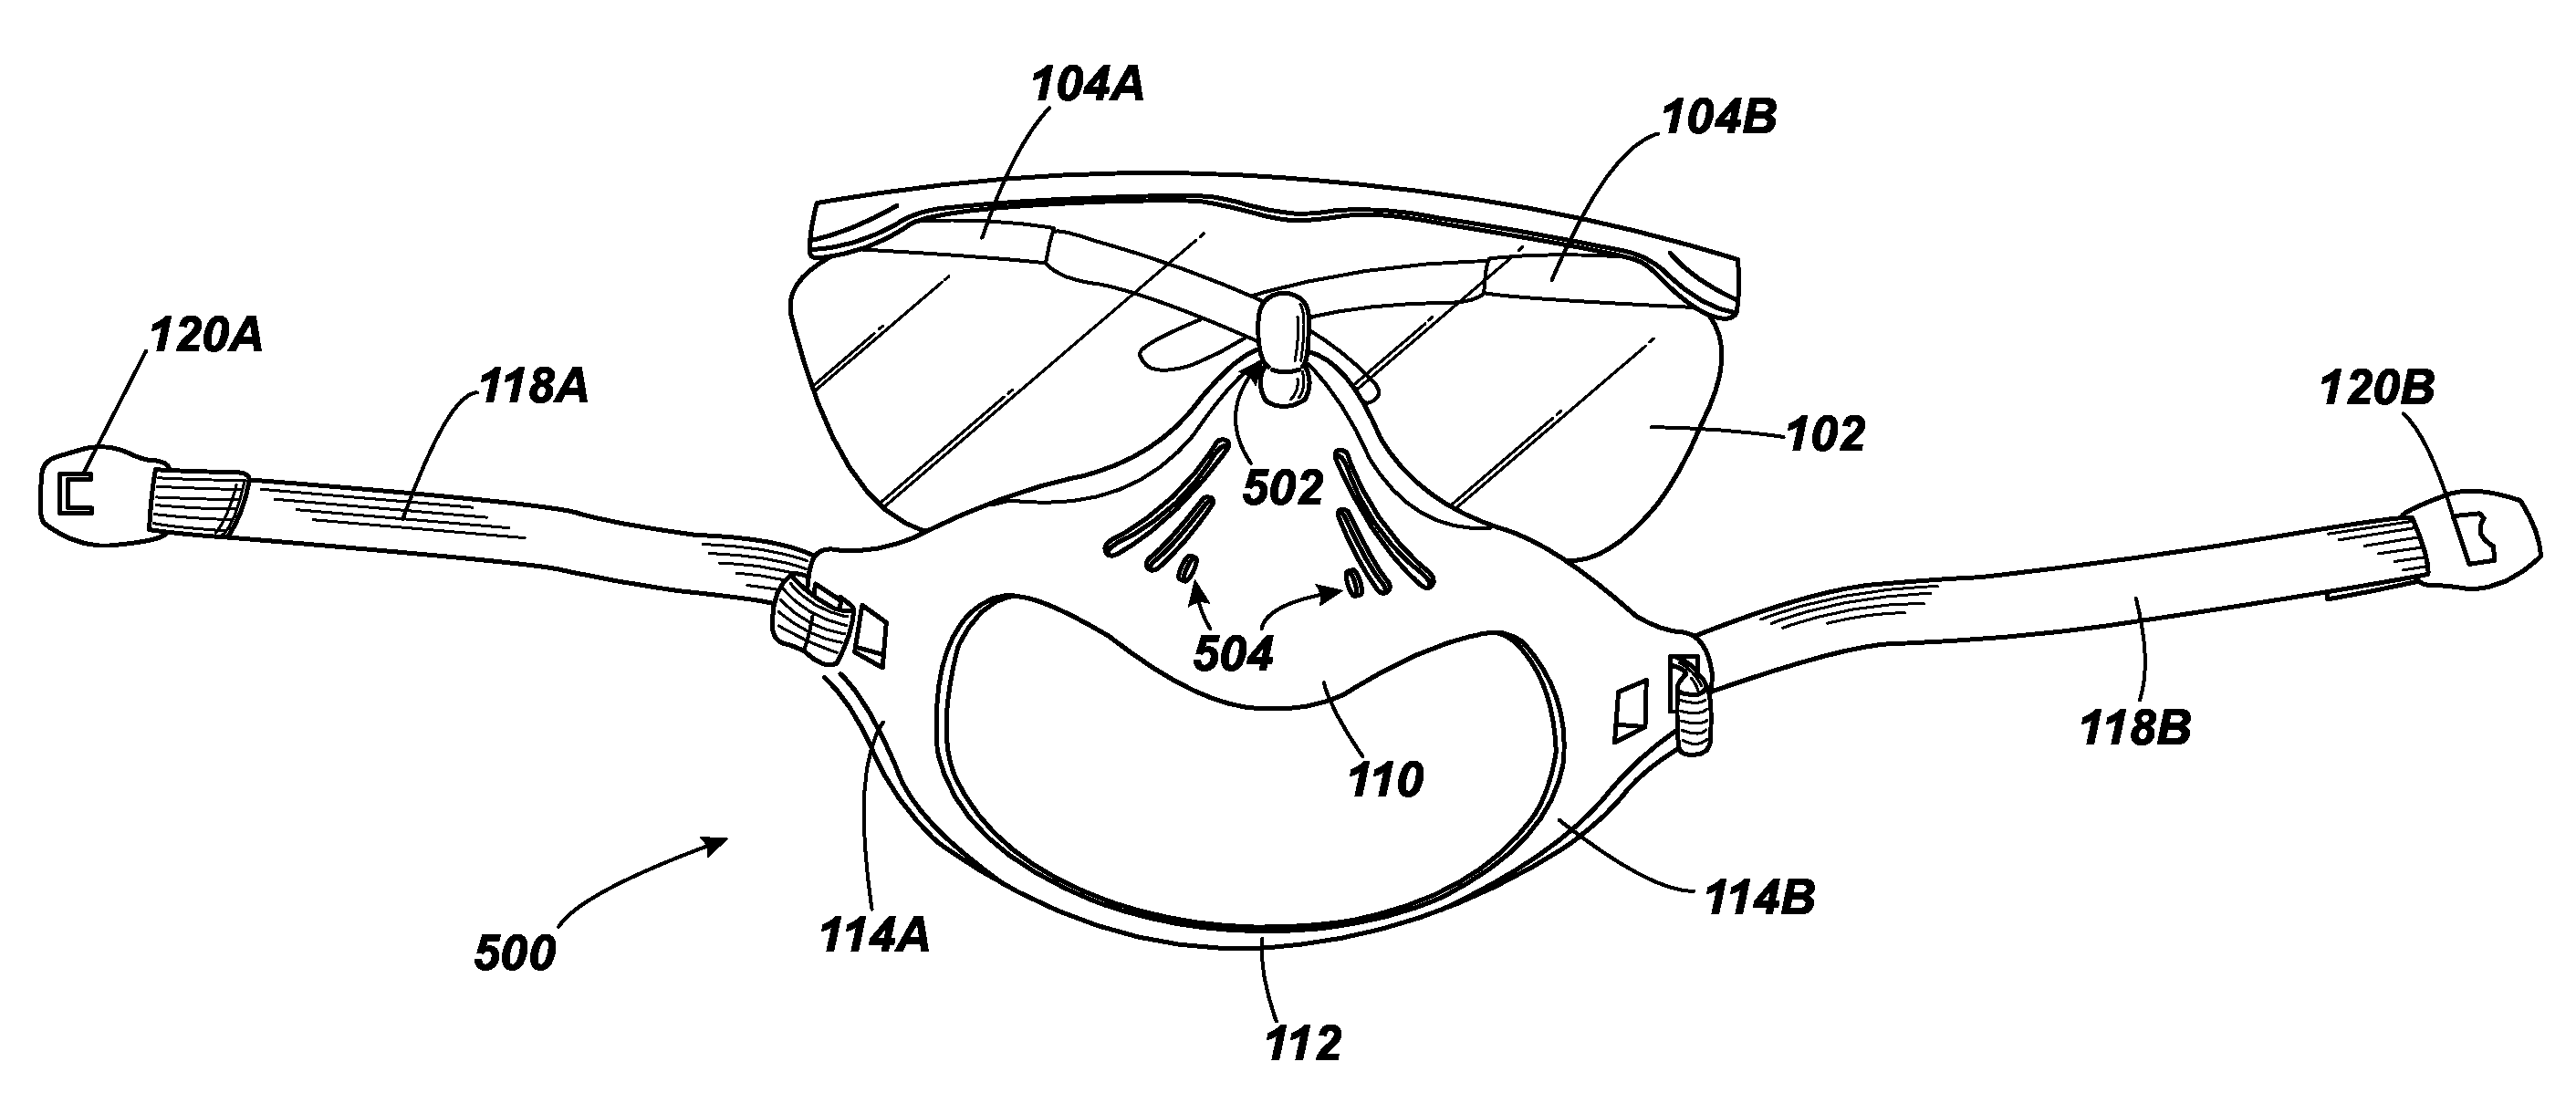 Wearable protective device